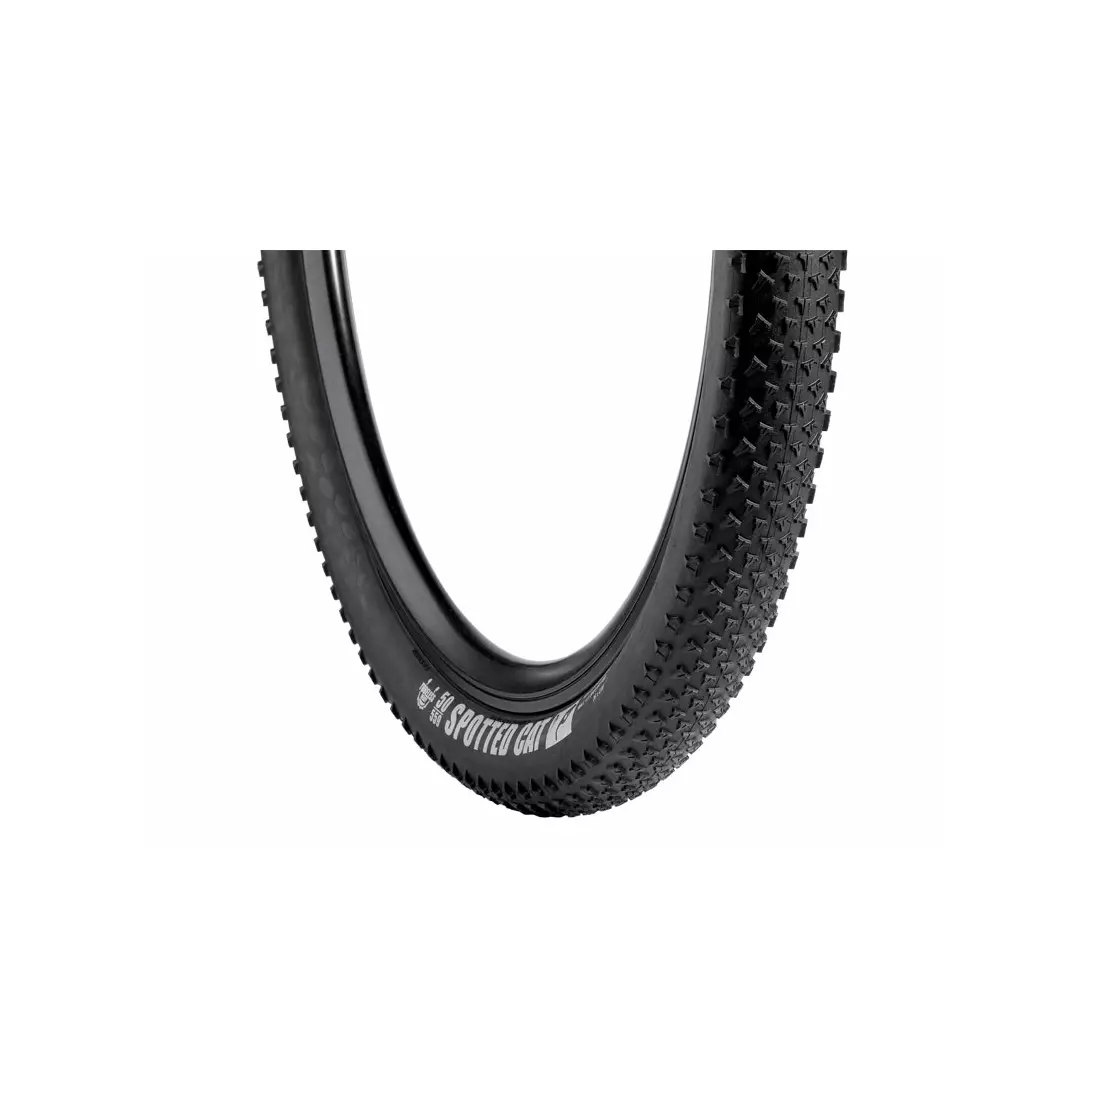 VREDESTEIN SPOTTED CAT Mtb bicycle tyre 29x2.00 (50-622) TUBELESS READY TPI120 575g black VRD-29204